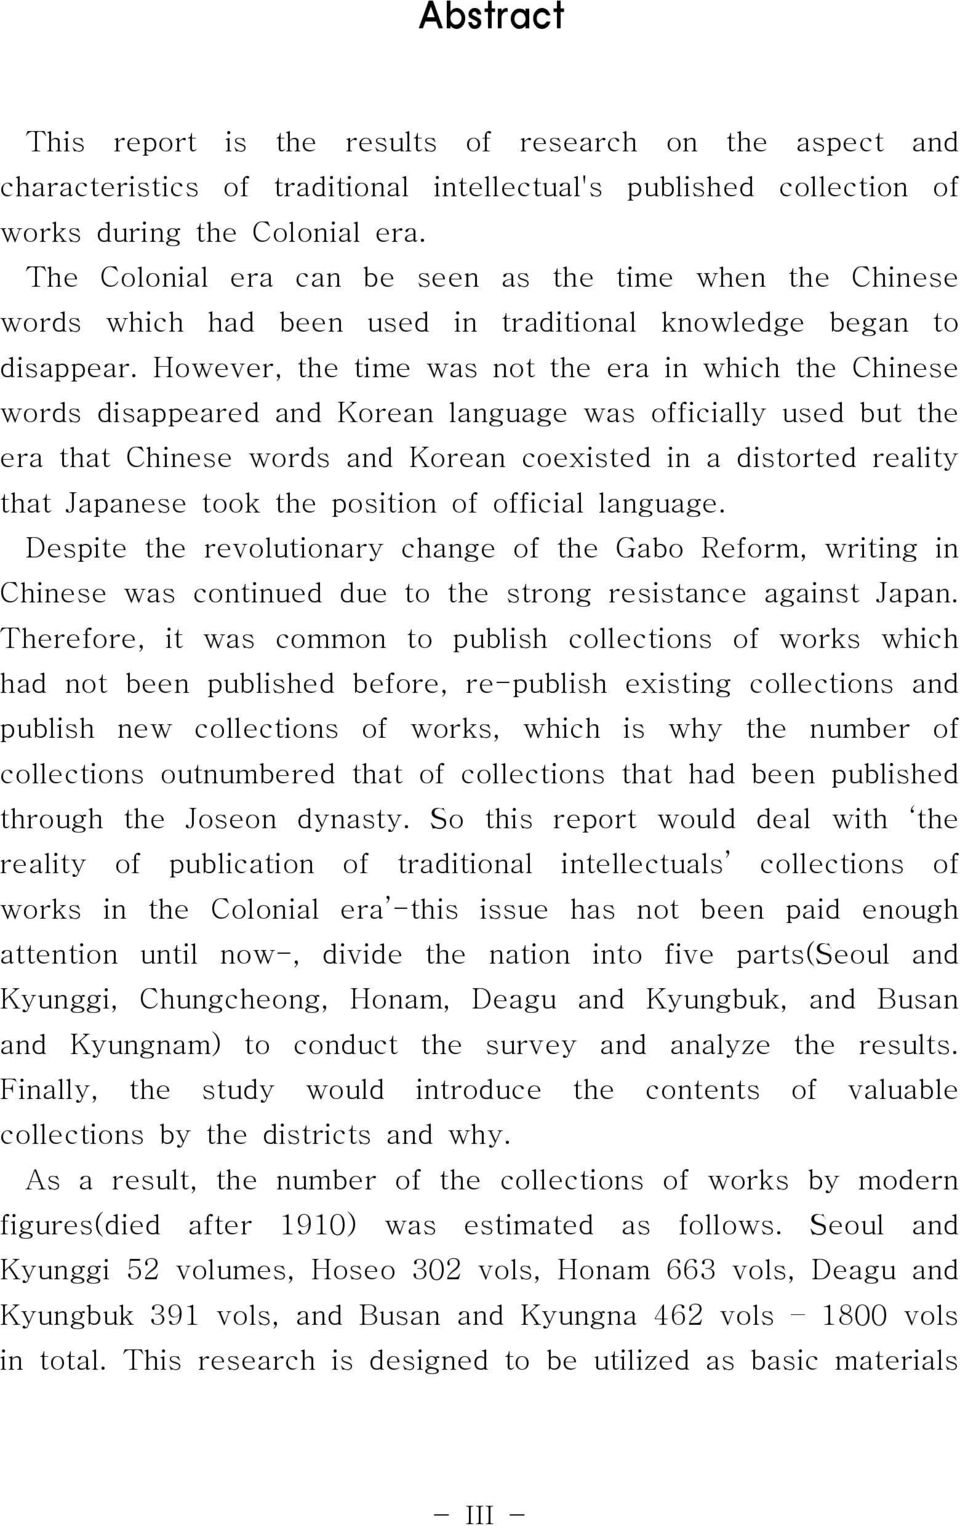 However, the time was not the era in which the Chinese words disappeared and Korean language was officially used but the era that Chinese words and Korean coexisted in a distorted reality that